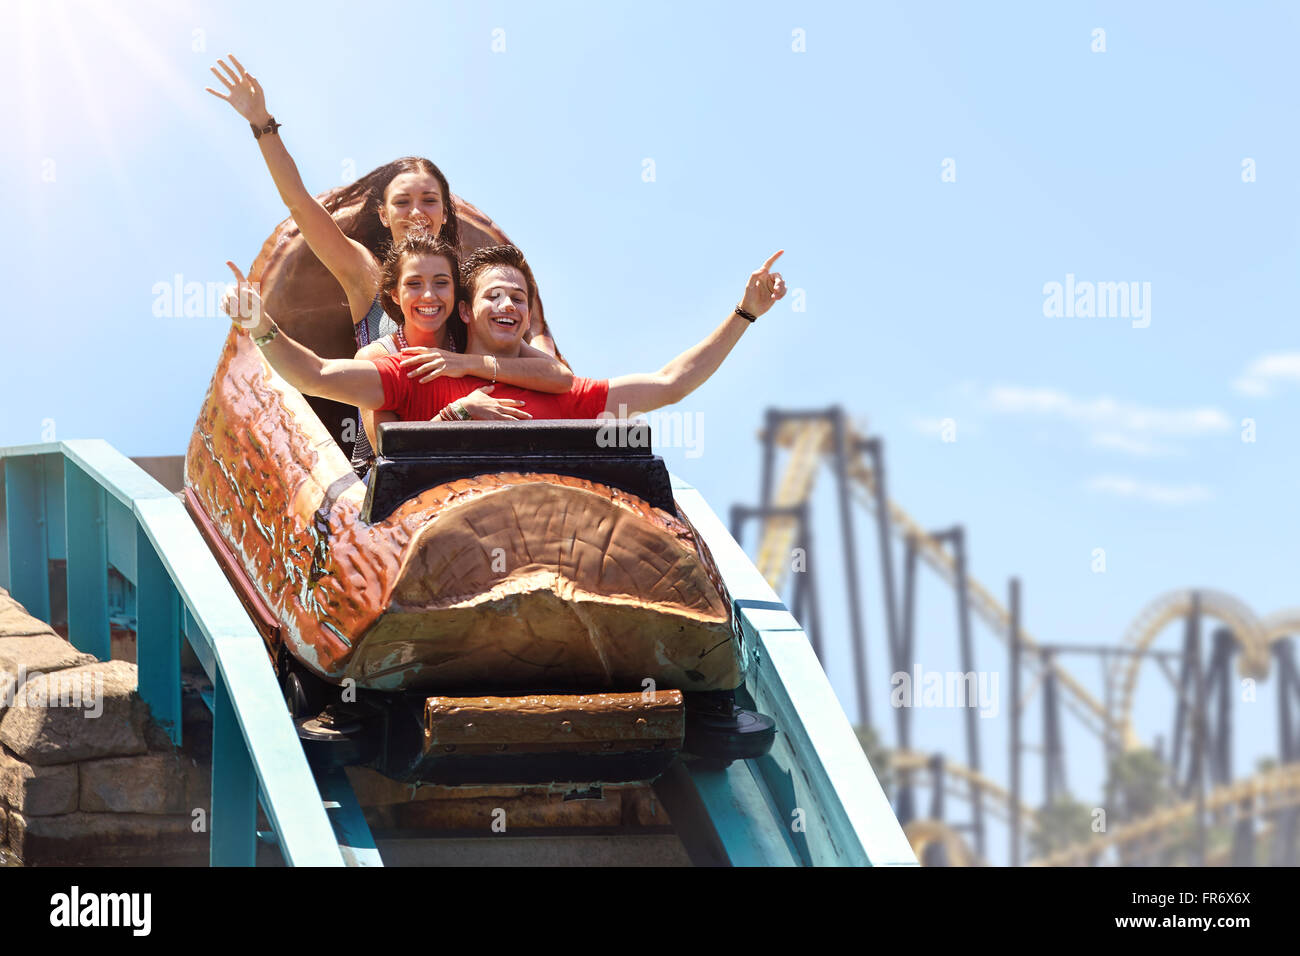 Friends cheering and riding log amusement park ride Stock Photo